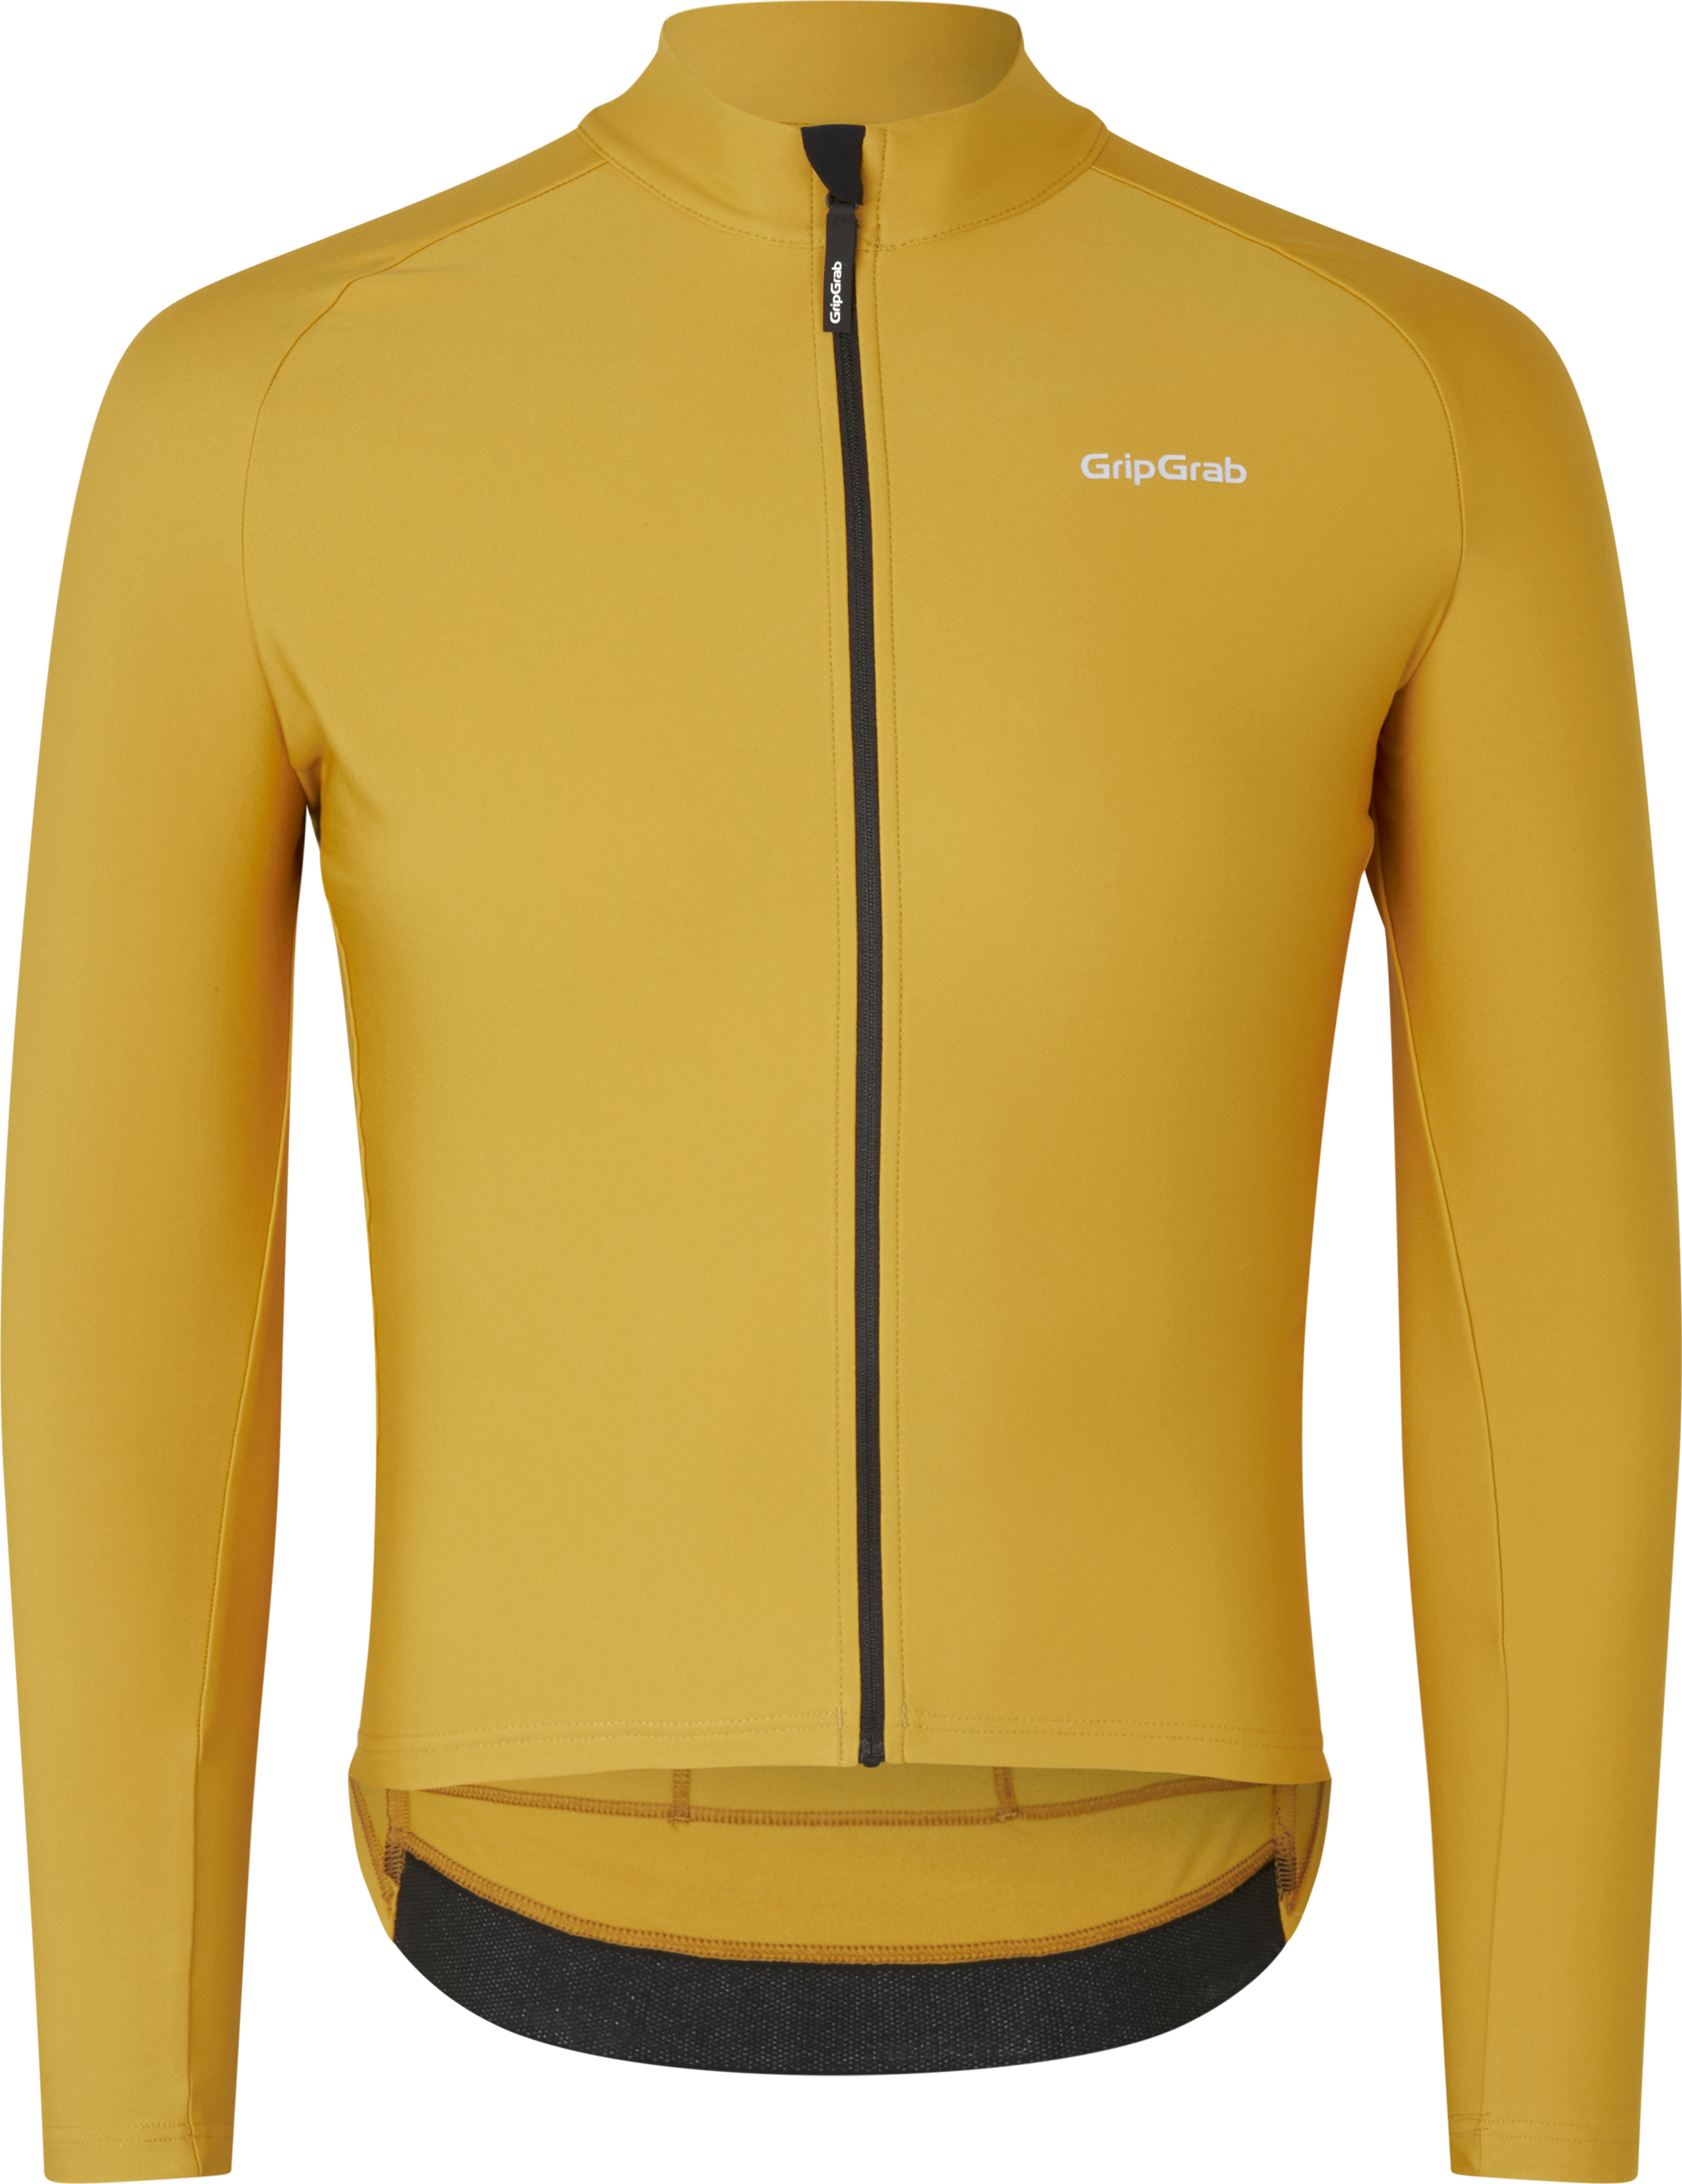 Gripgrab Men’s ThermaPace Thermal Long Sleeve Jersey Mustard Yellow